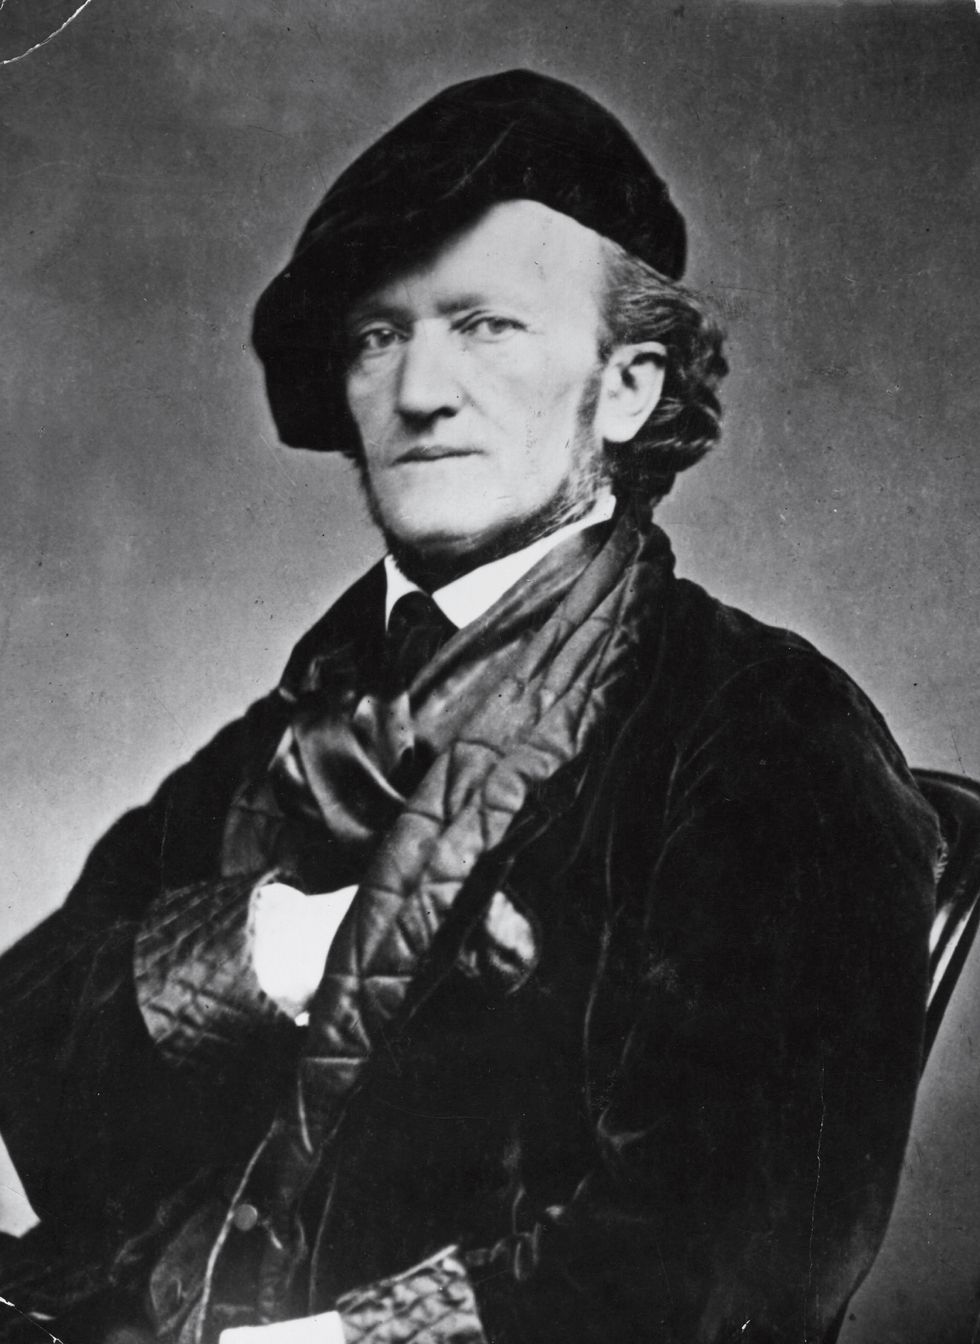 german composer richard wagner 1813 1883, circa 1868 photo by henry guttmann collectionhulton archivegetty images